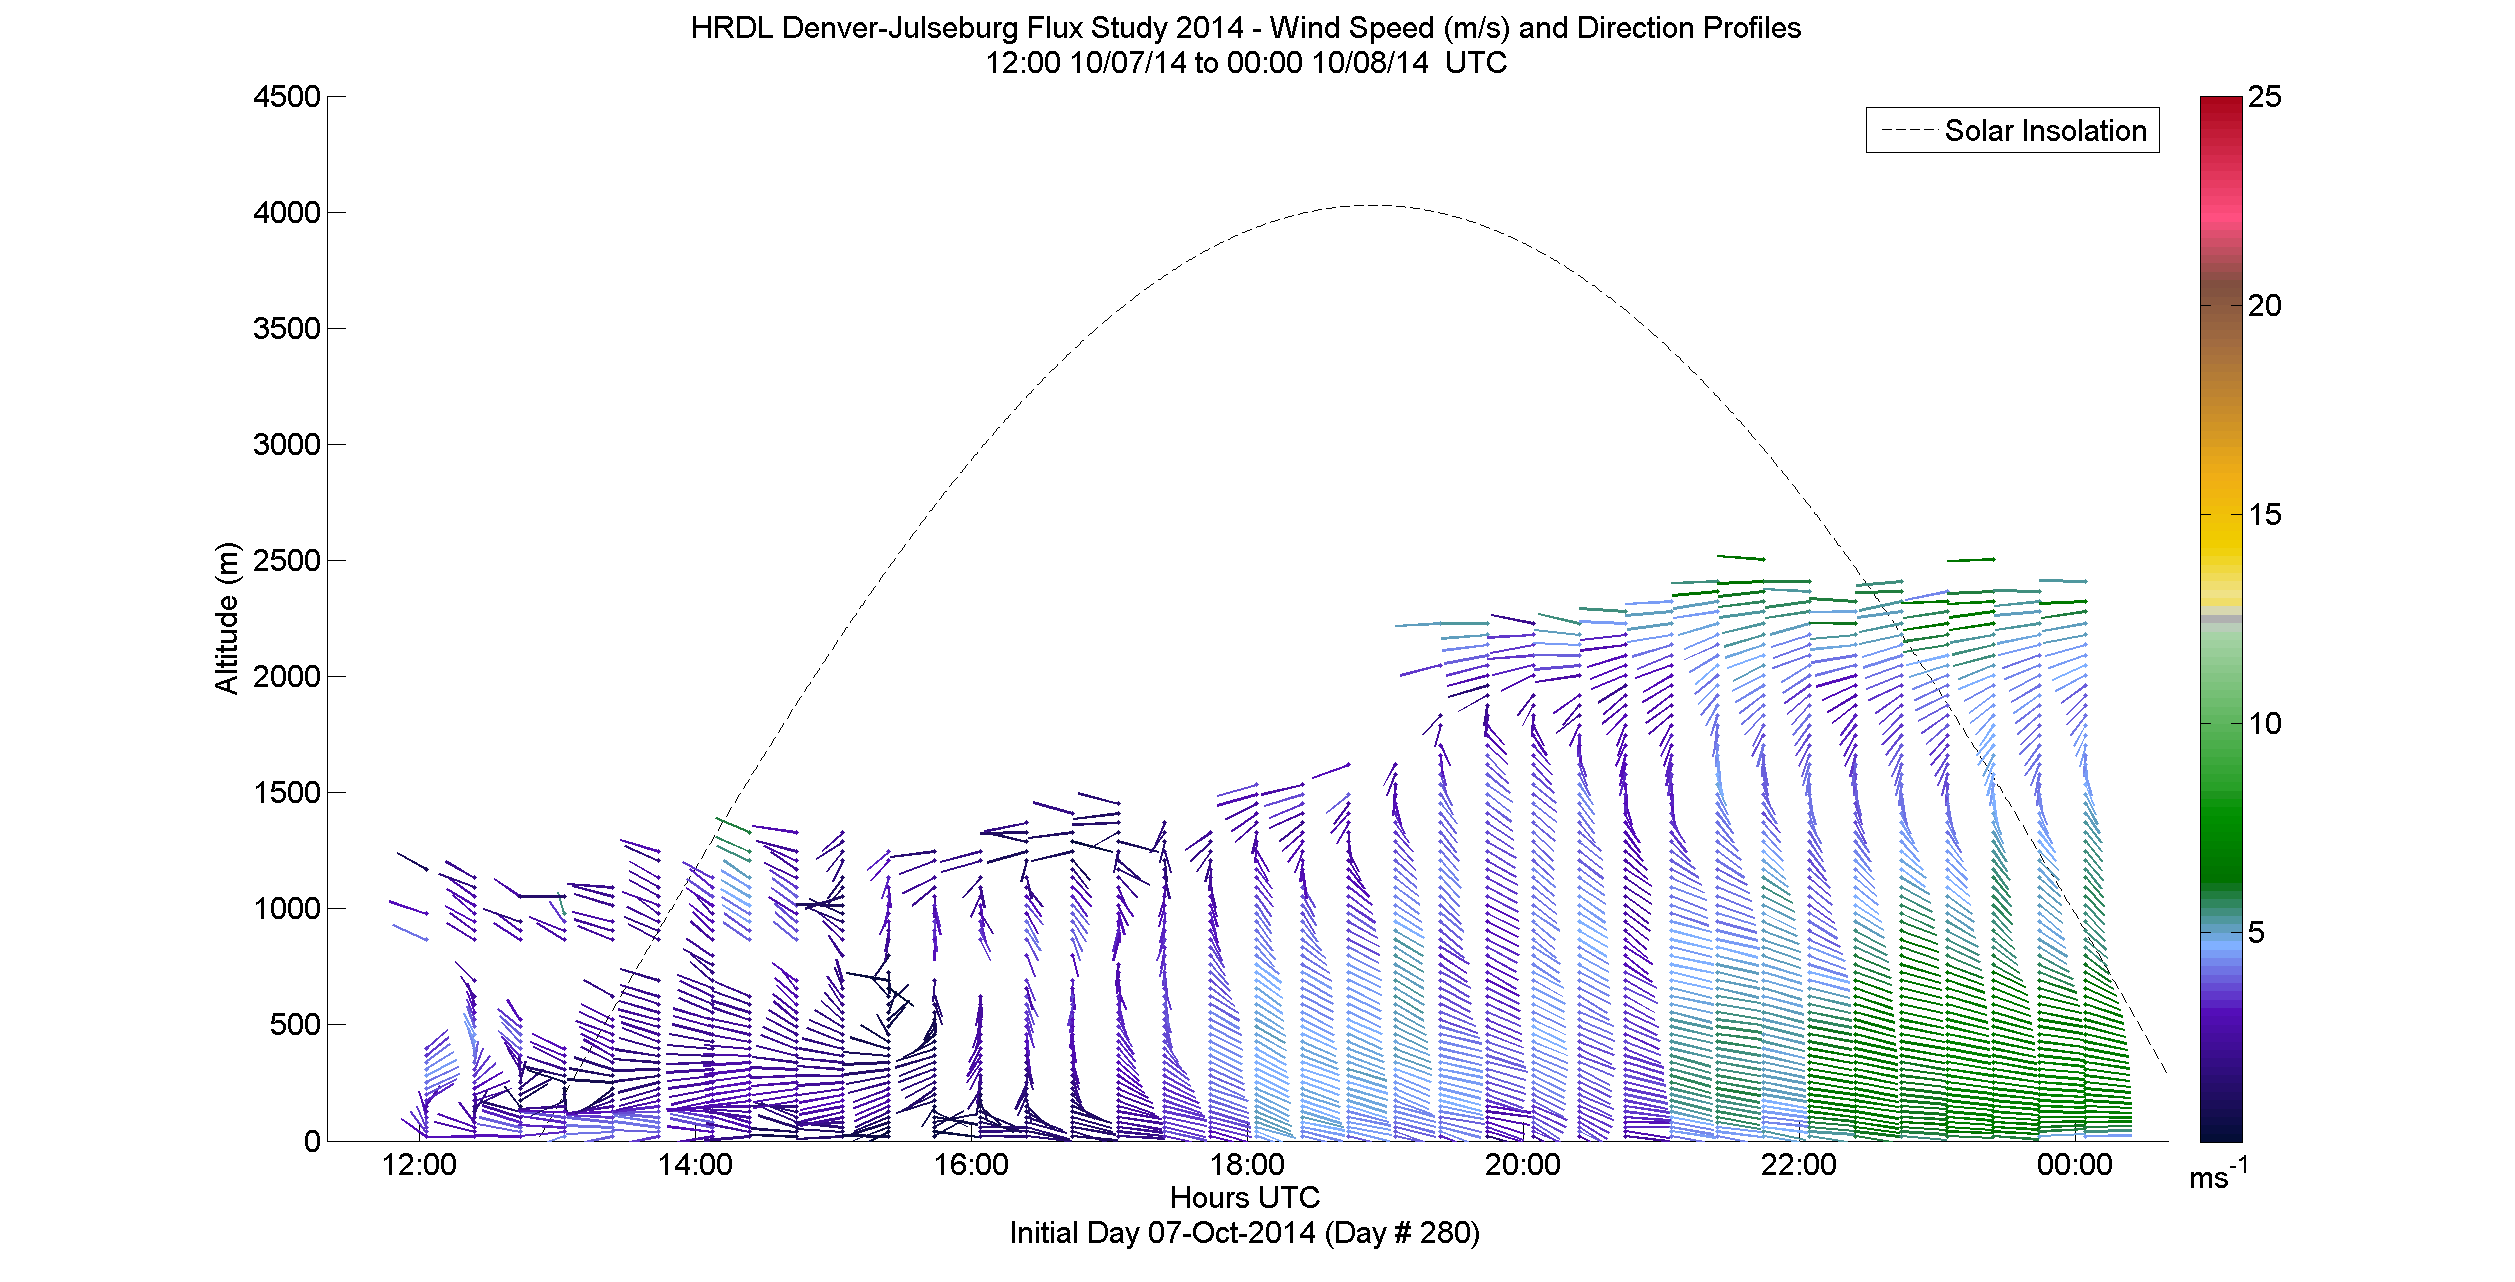 HRDL speed and direction profile - October 7 pm